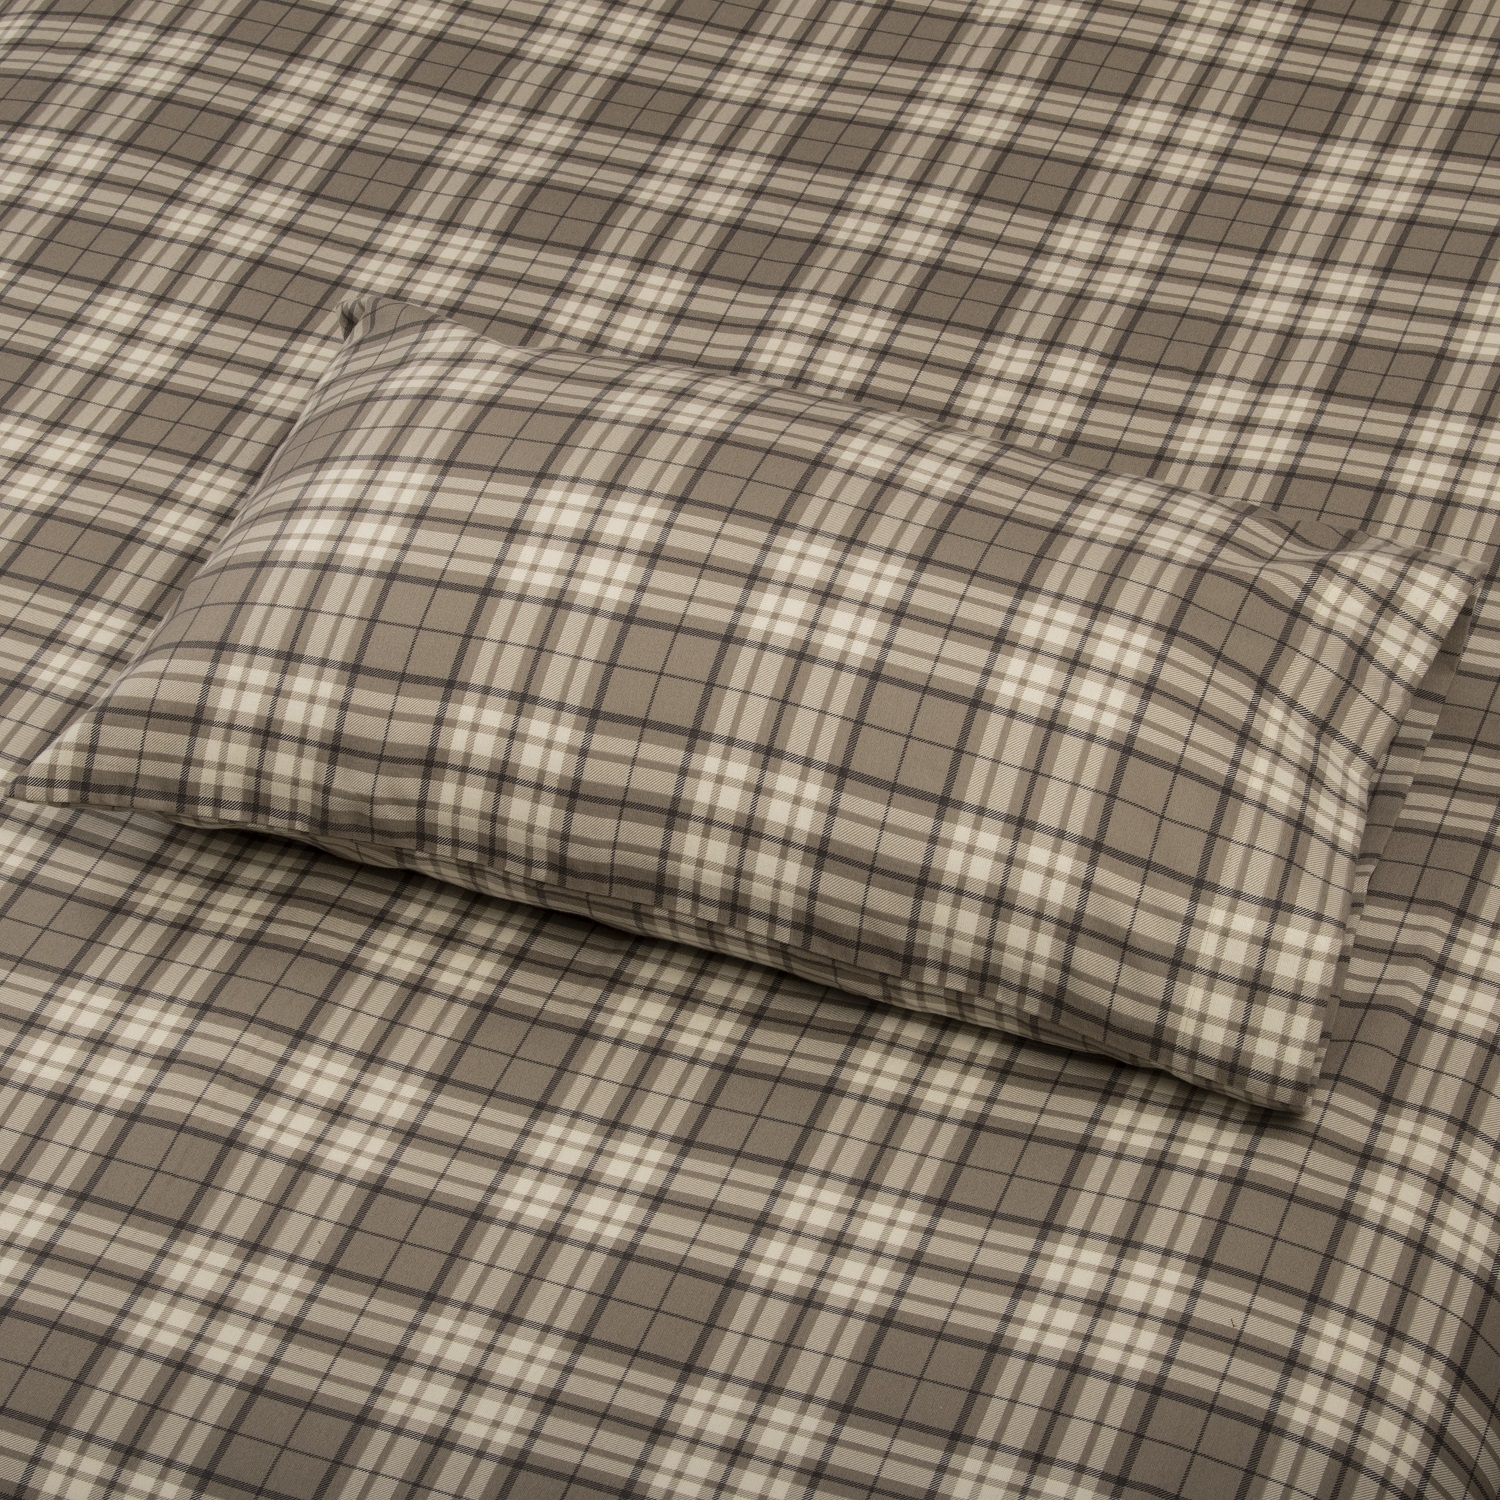 Mainstays Flannel Sheet Set Taupe Plaid Queen - image 4 of 7